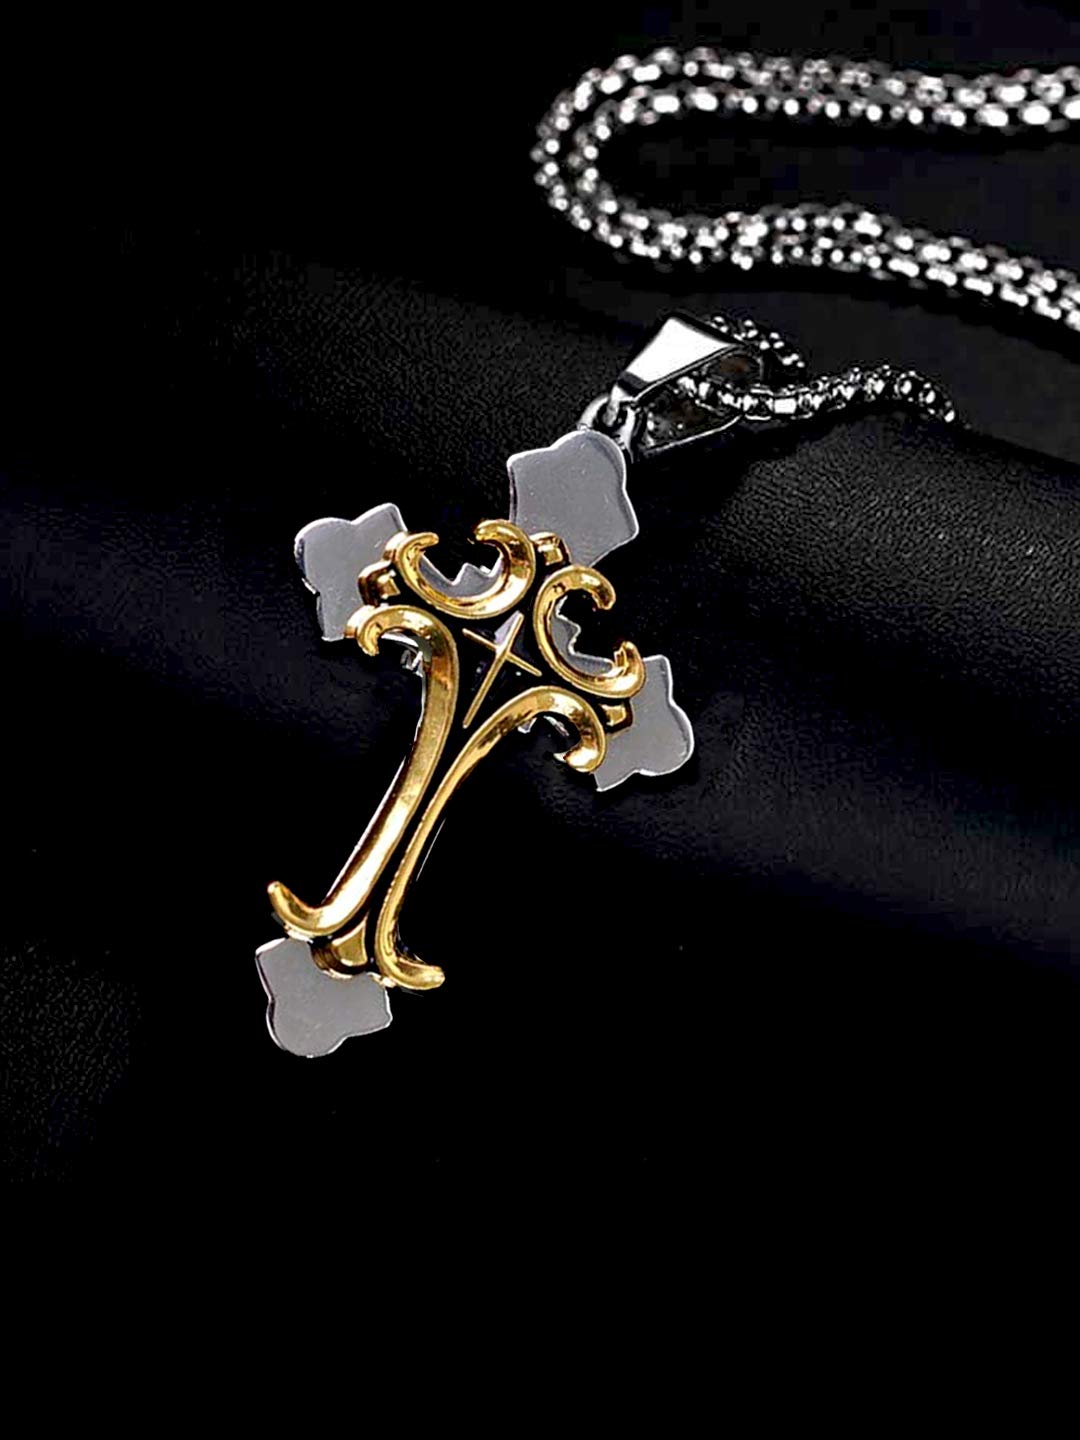 Yellow Chimes Cross Pendant for Men Chain Men Pendant Dual Tone Cross Sign Gold Polished Stainless Steel Chain Pendant for Men and Boys.